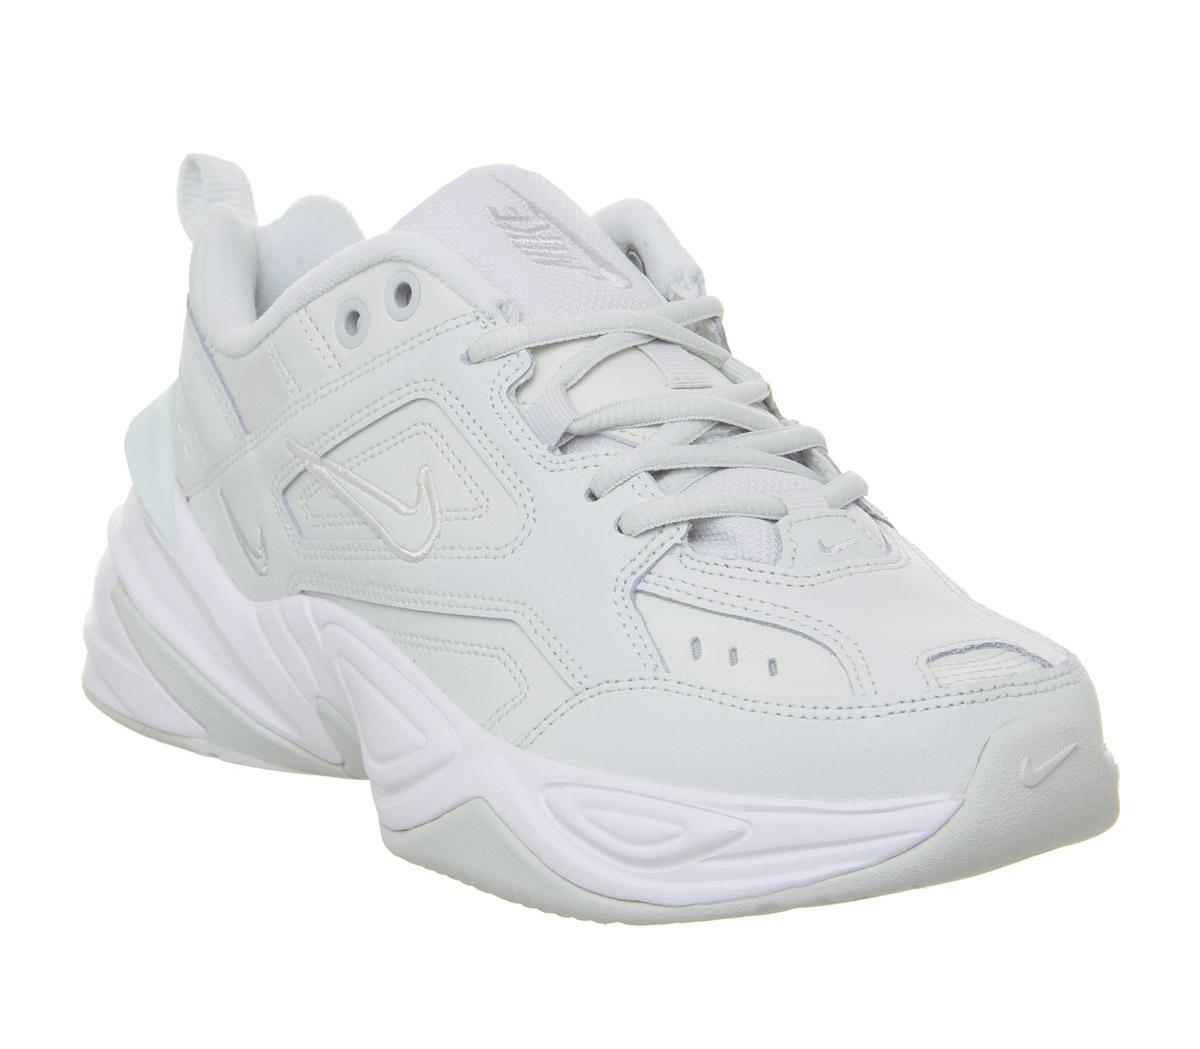 wise Composition Sign Nike M2k Tekno Trainers Spruce Aura Sail Summit White F - Women's Trainers